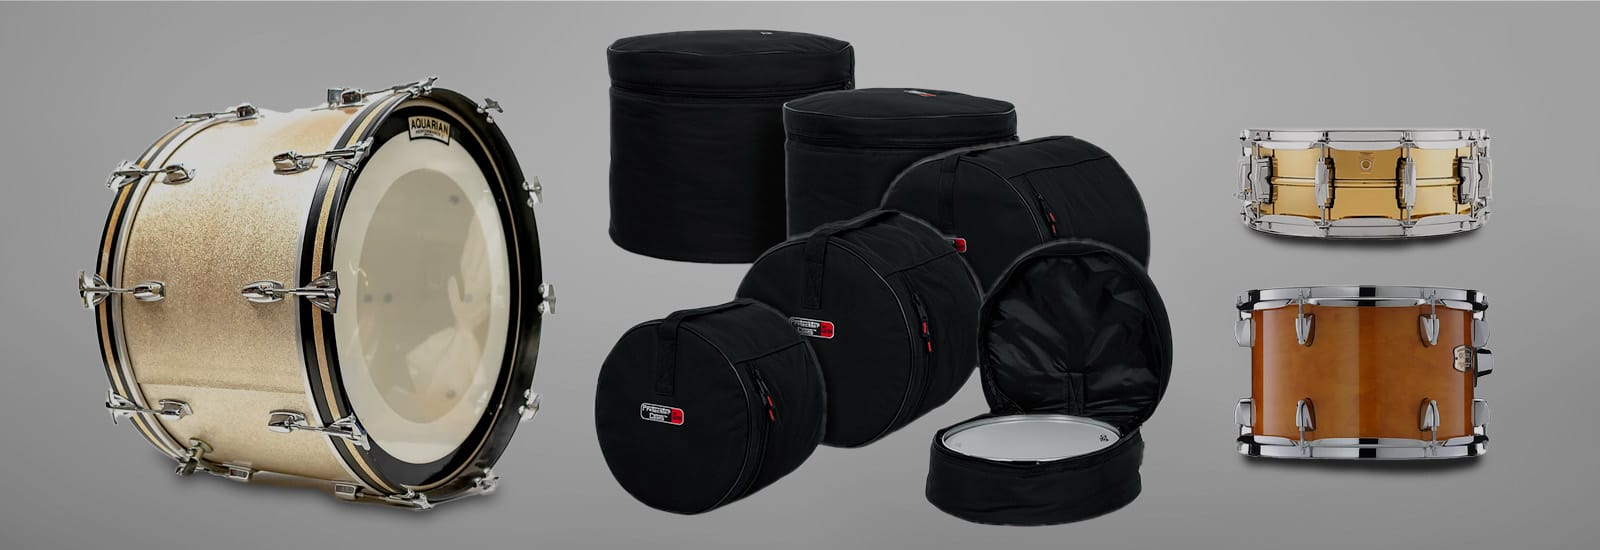 Shop Drum Gig Bags Today with GatorCo!